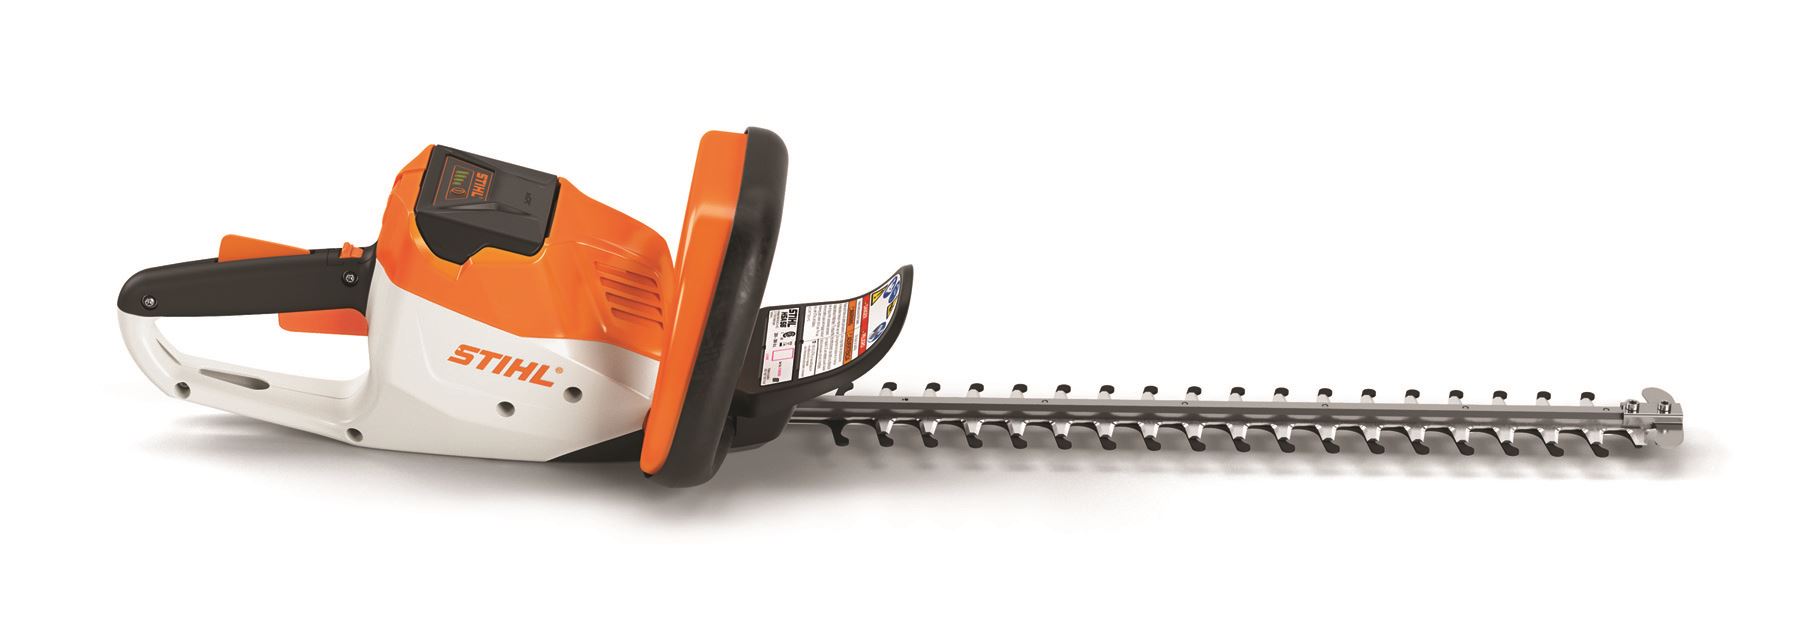 battery hedge trimmer